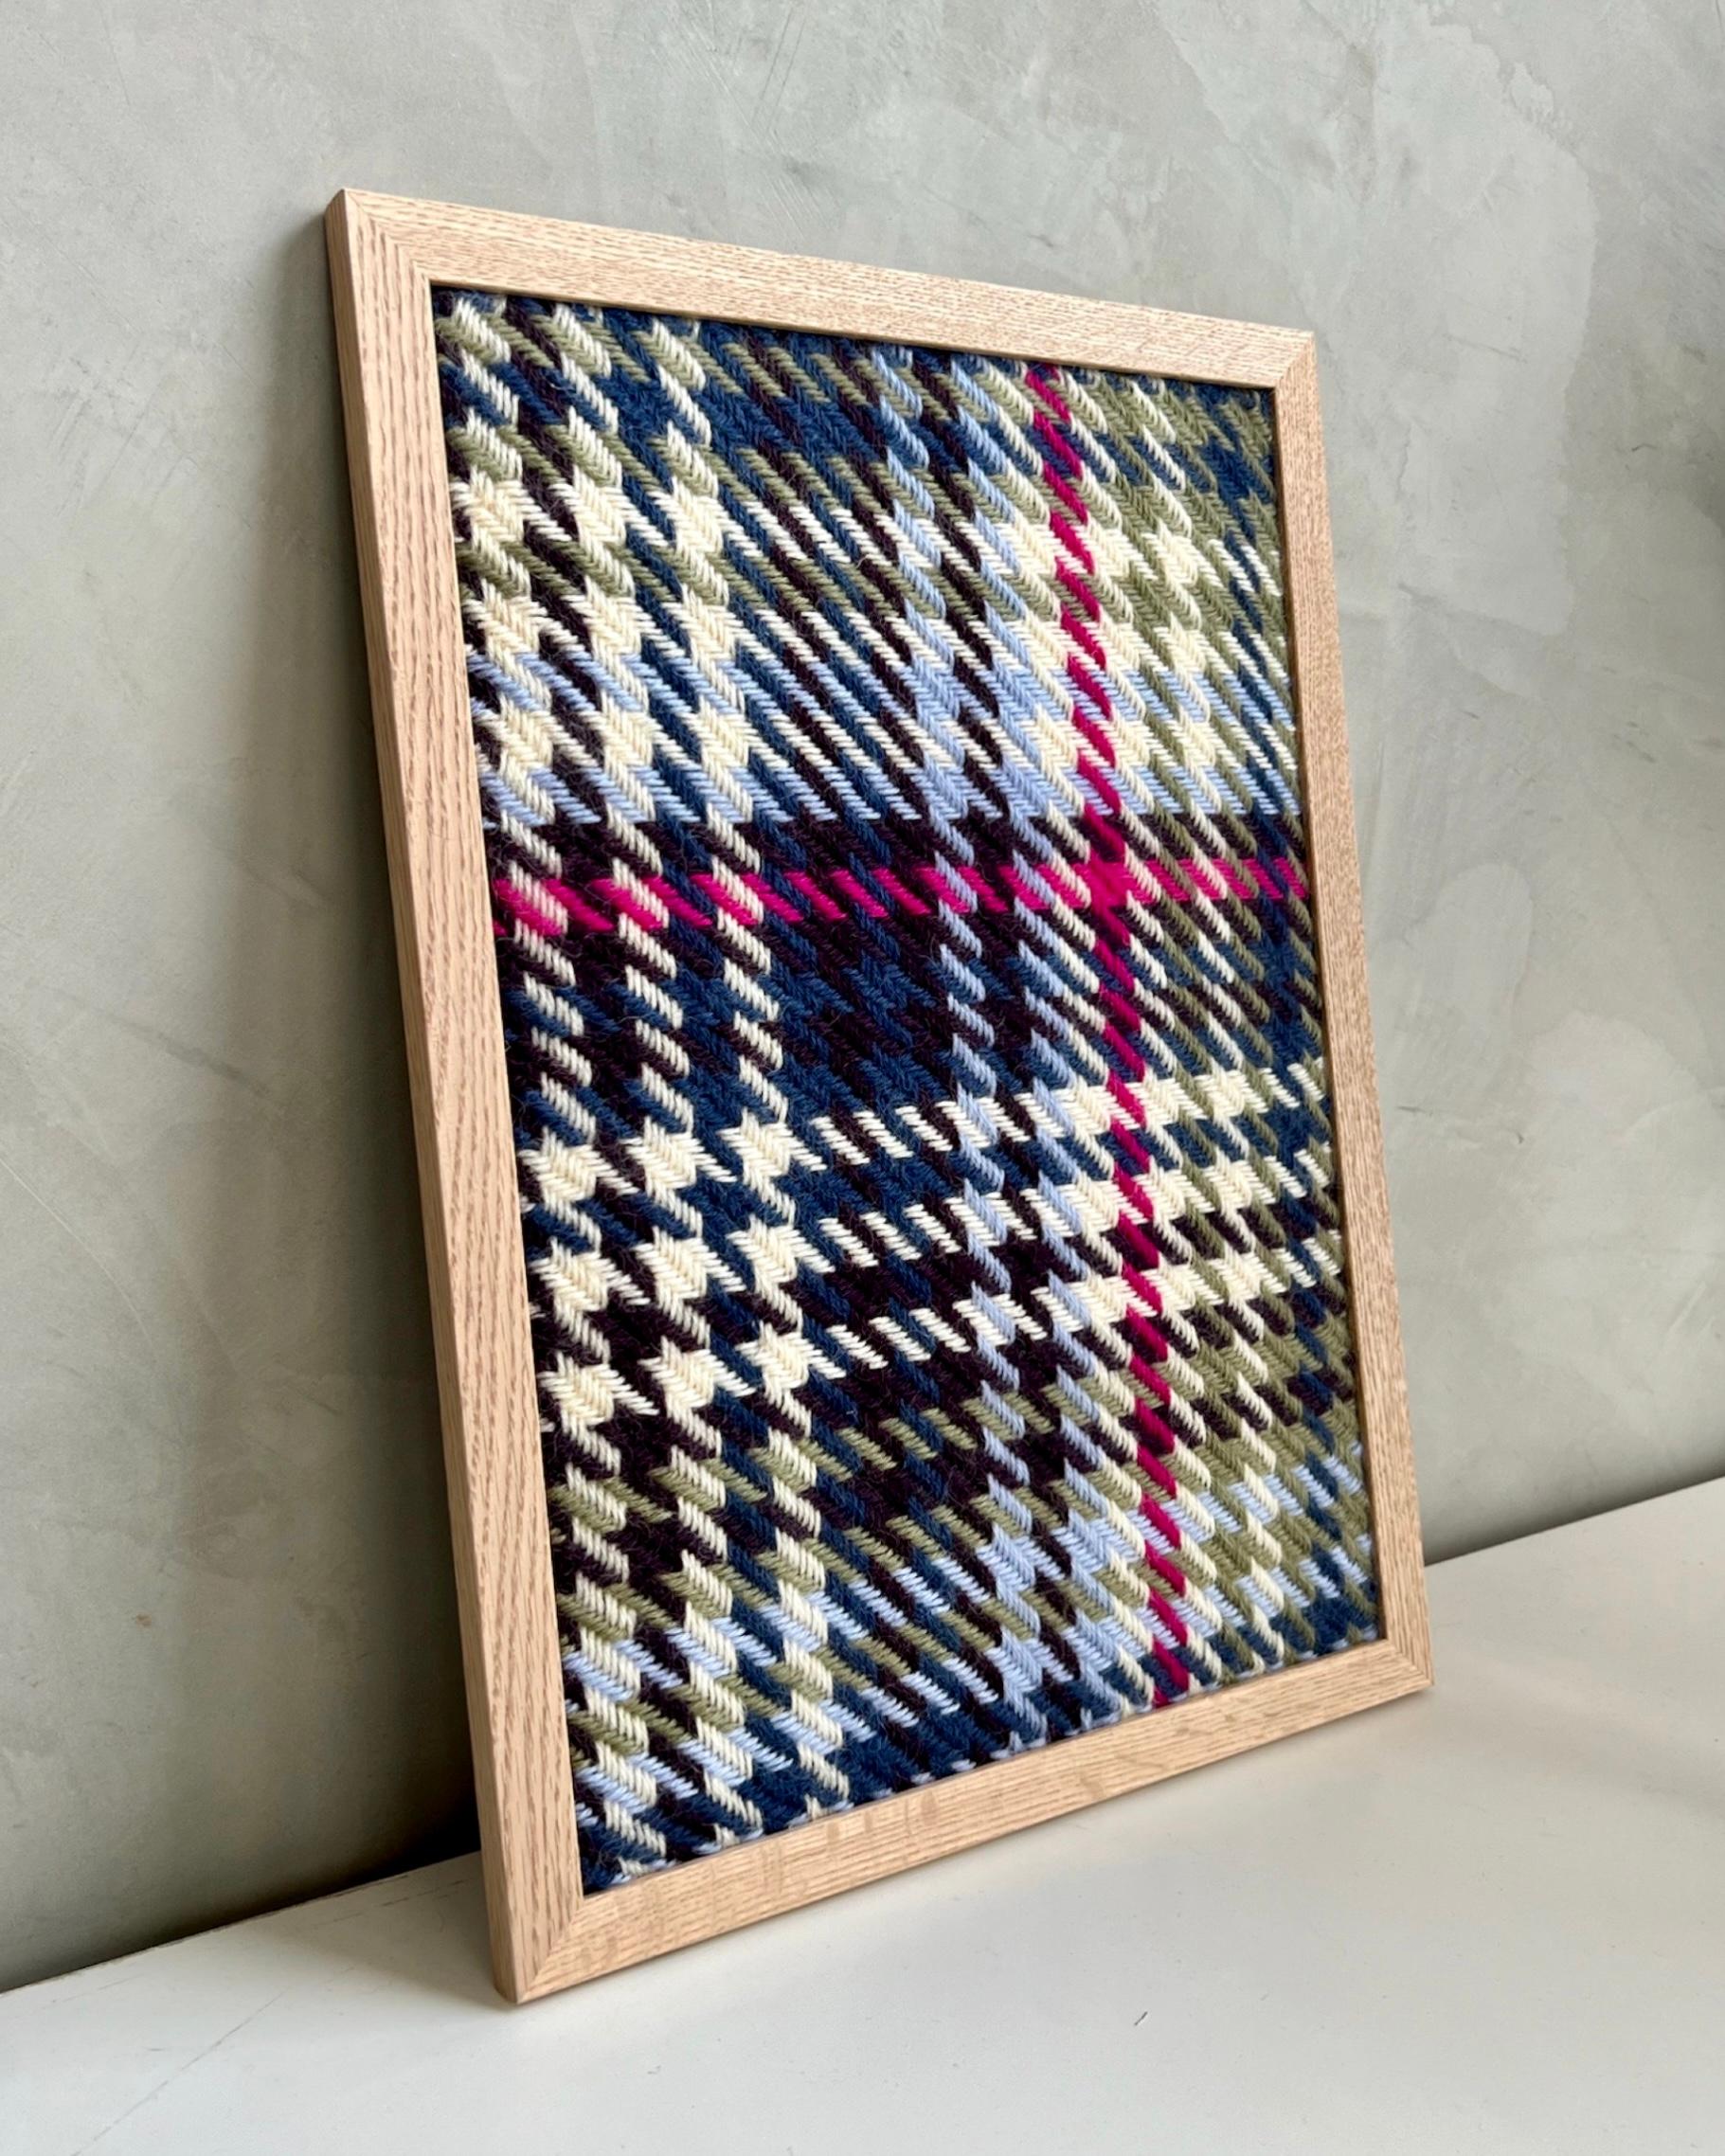 This one-off hand woven panel, with its with its revisited houndstooth tweed pattern, has been specially designed to highlight the qualities of Wensleydale wool.
.
Exceptionally long, supple and silky, this rare wool produces dense, soft and